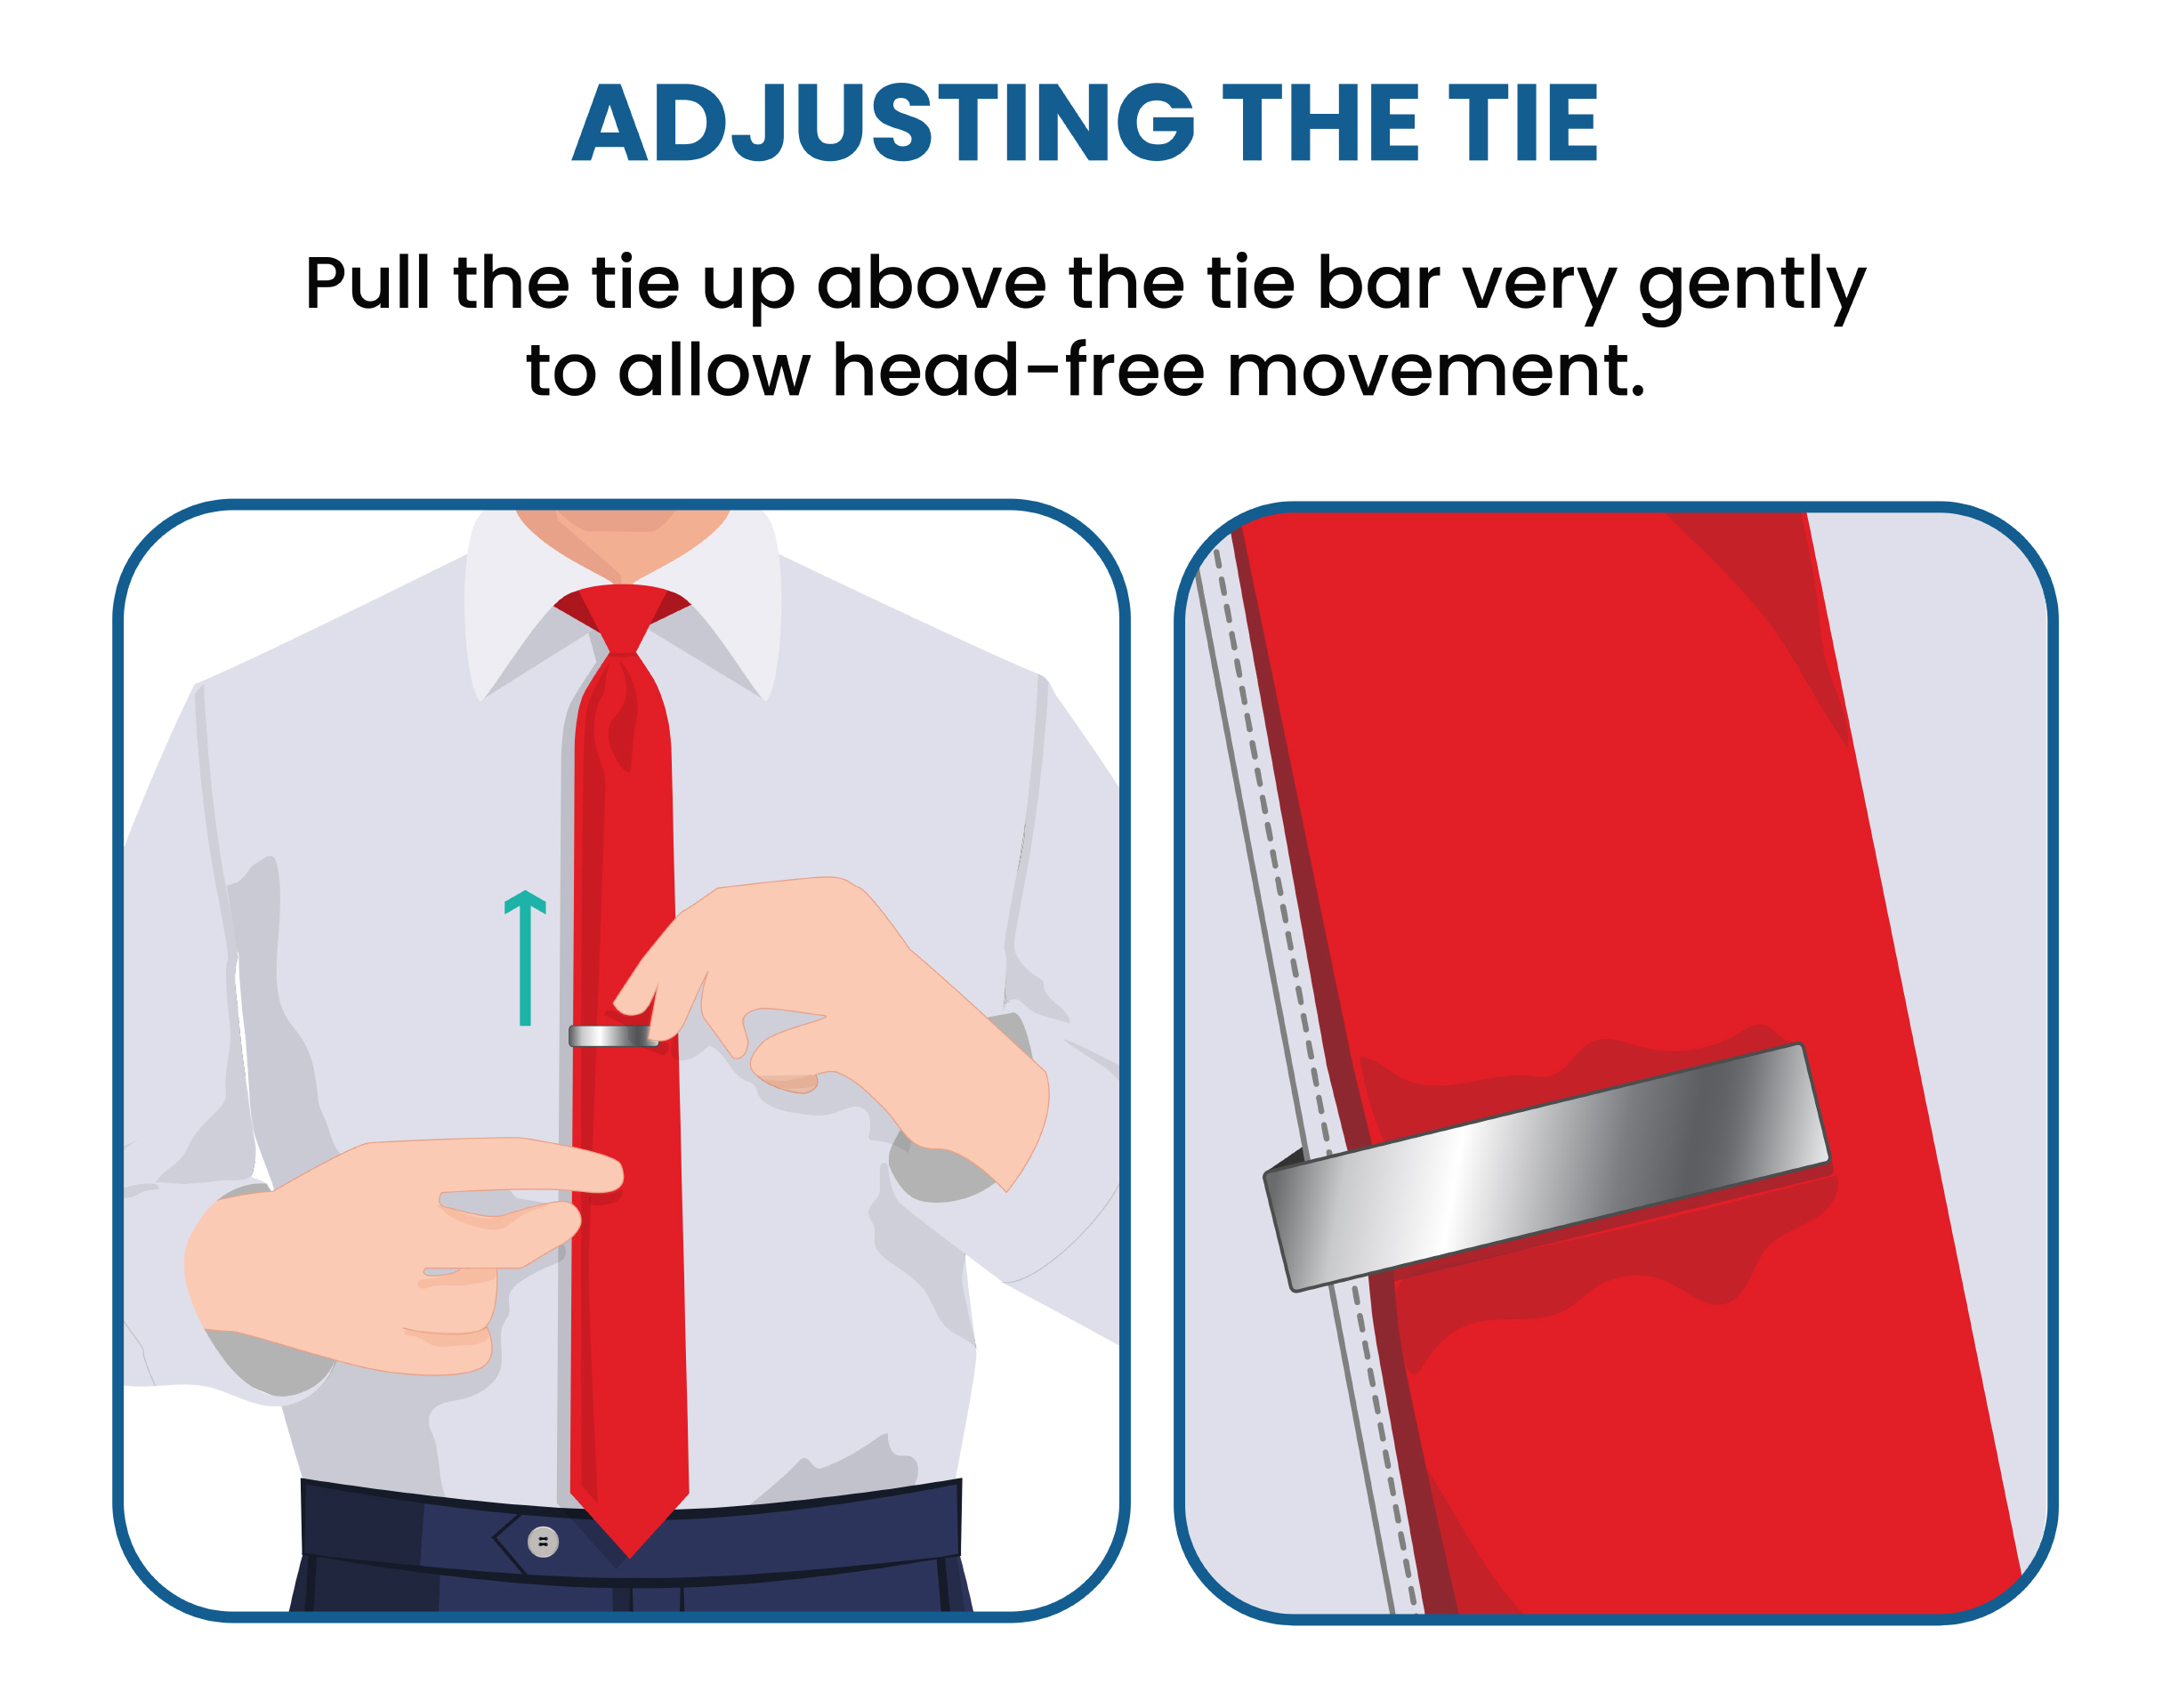 How to Wear a Tie Clip & Tie Bar Properly - Suits Expert